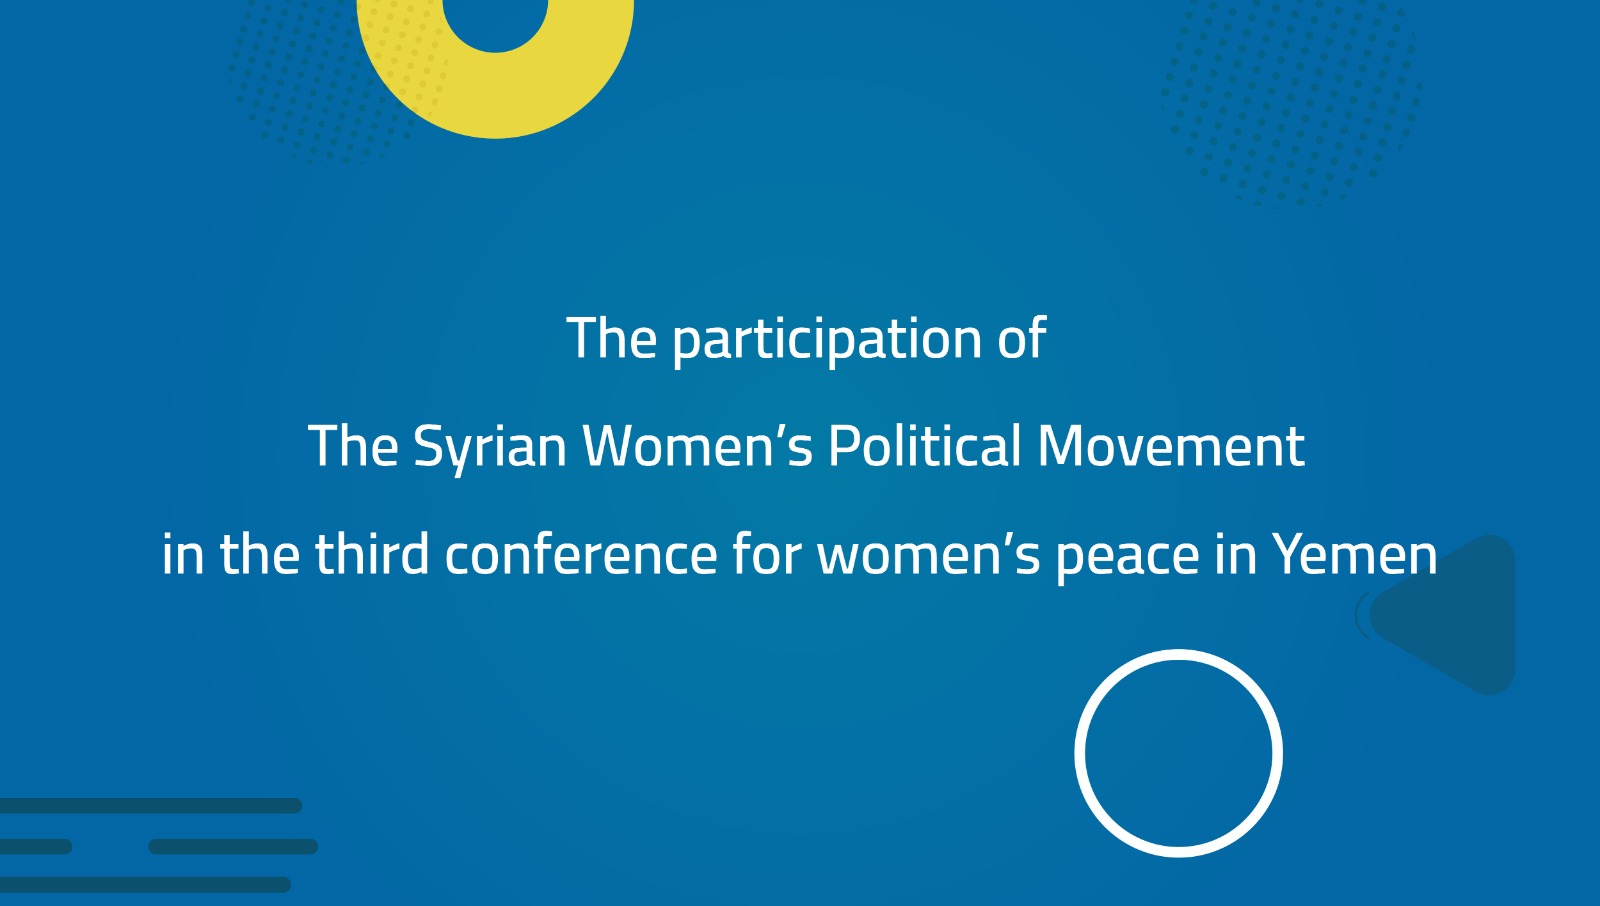 The participation of The Syrian Women’s Political Movement in the third conference for women’s peace in Yemen